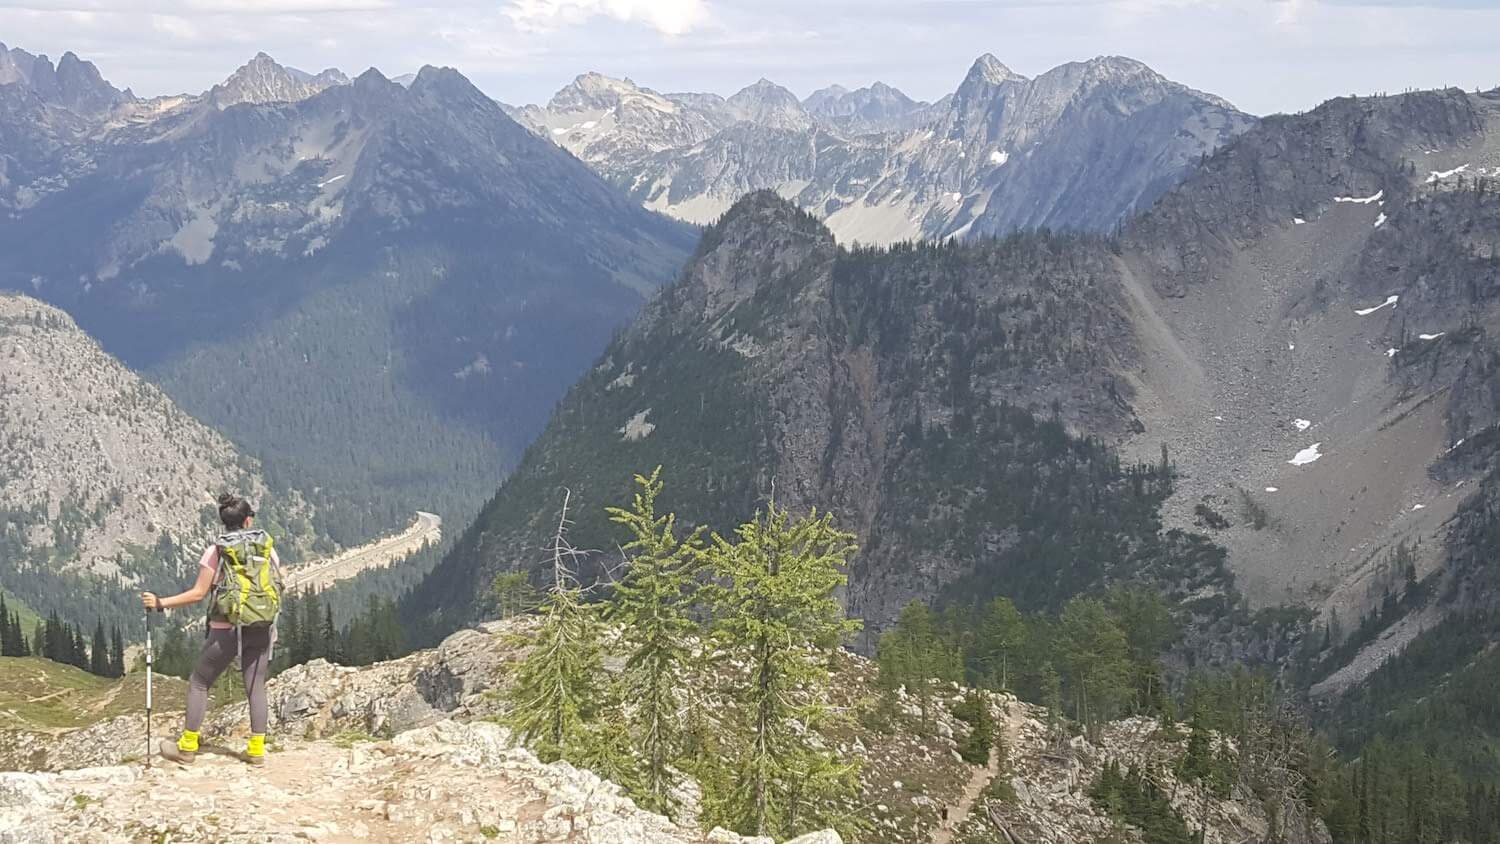 Hiker on a trail in North Cascades National Park